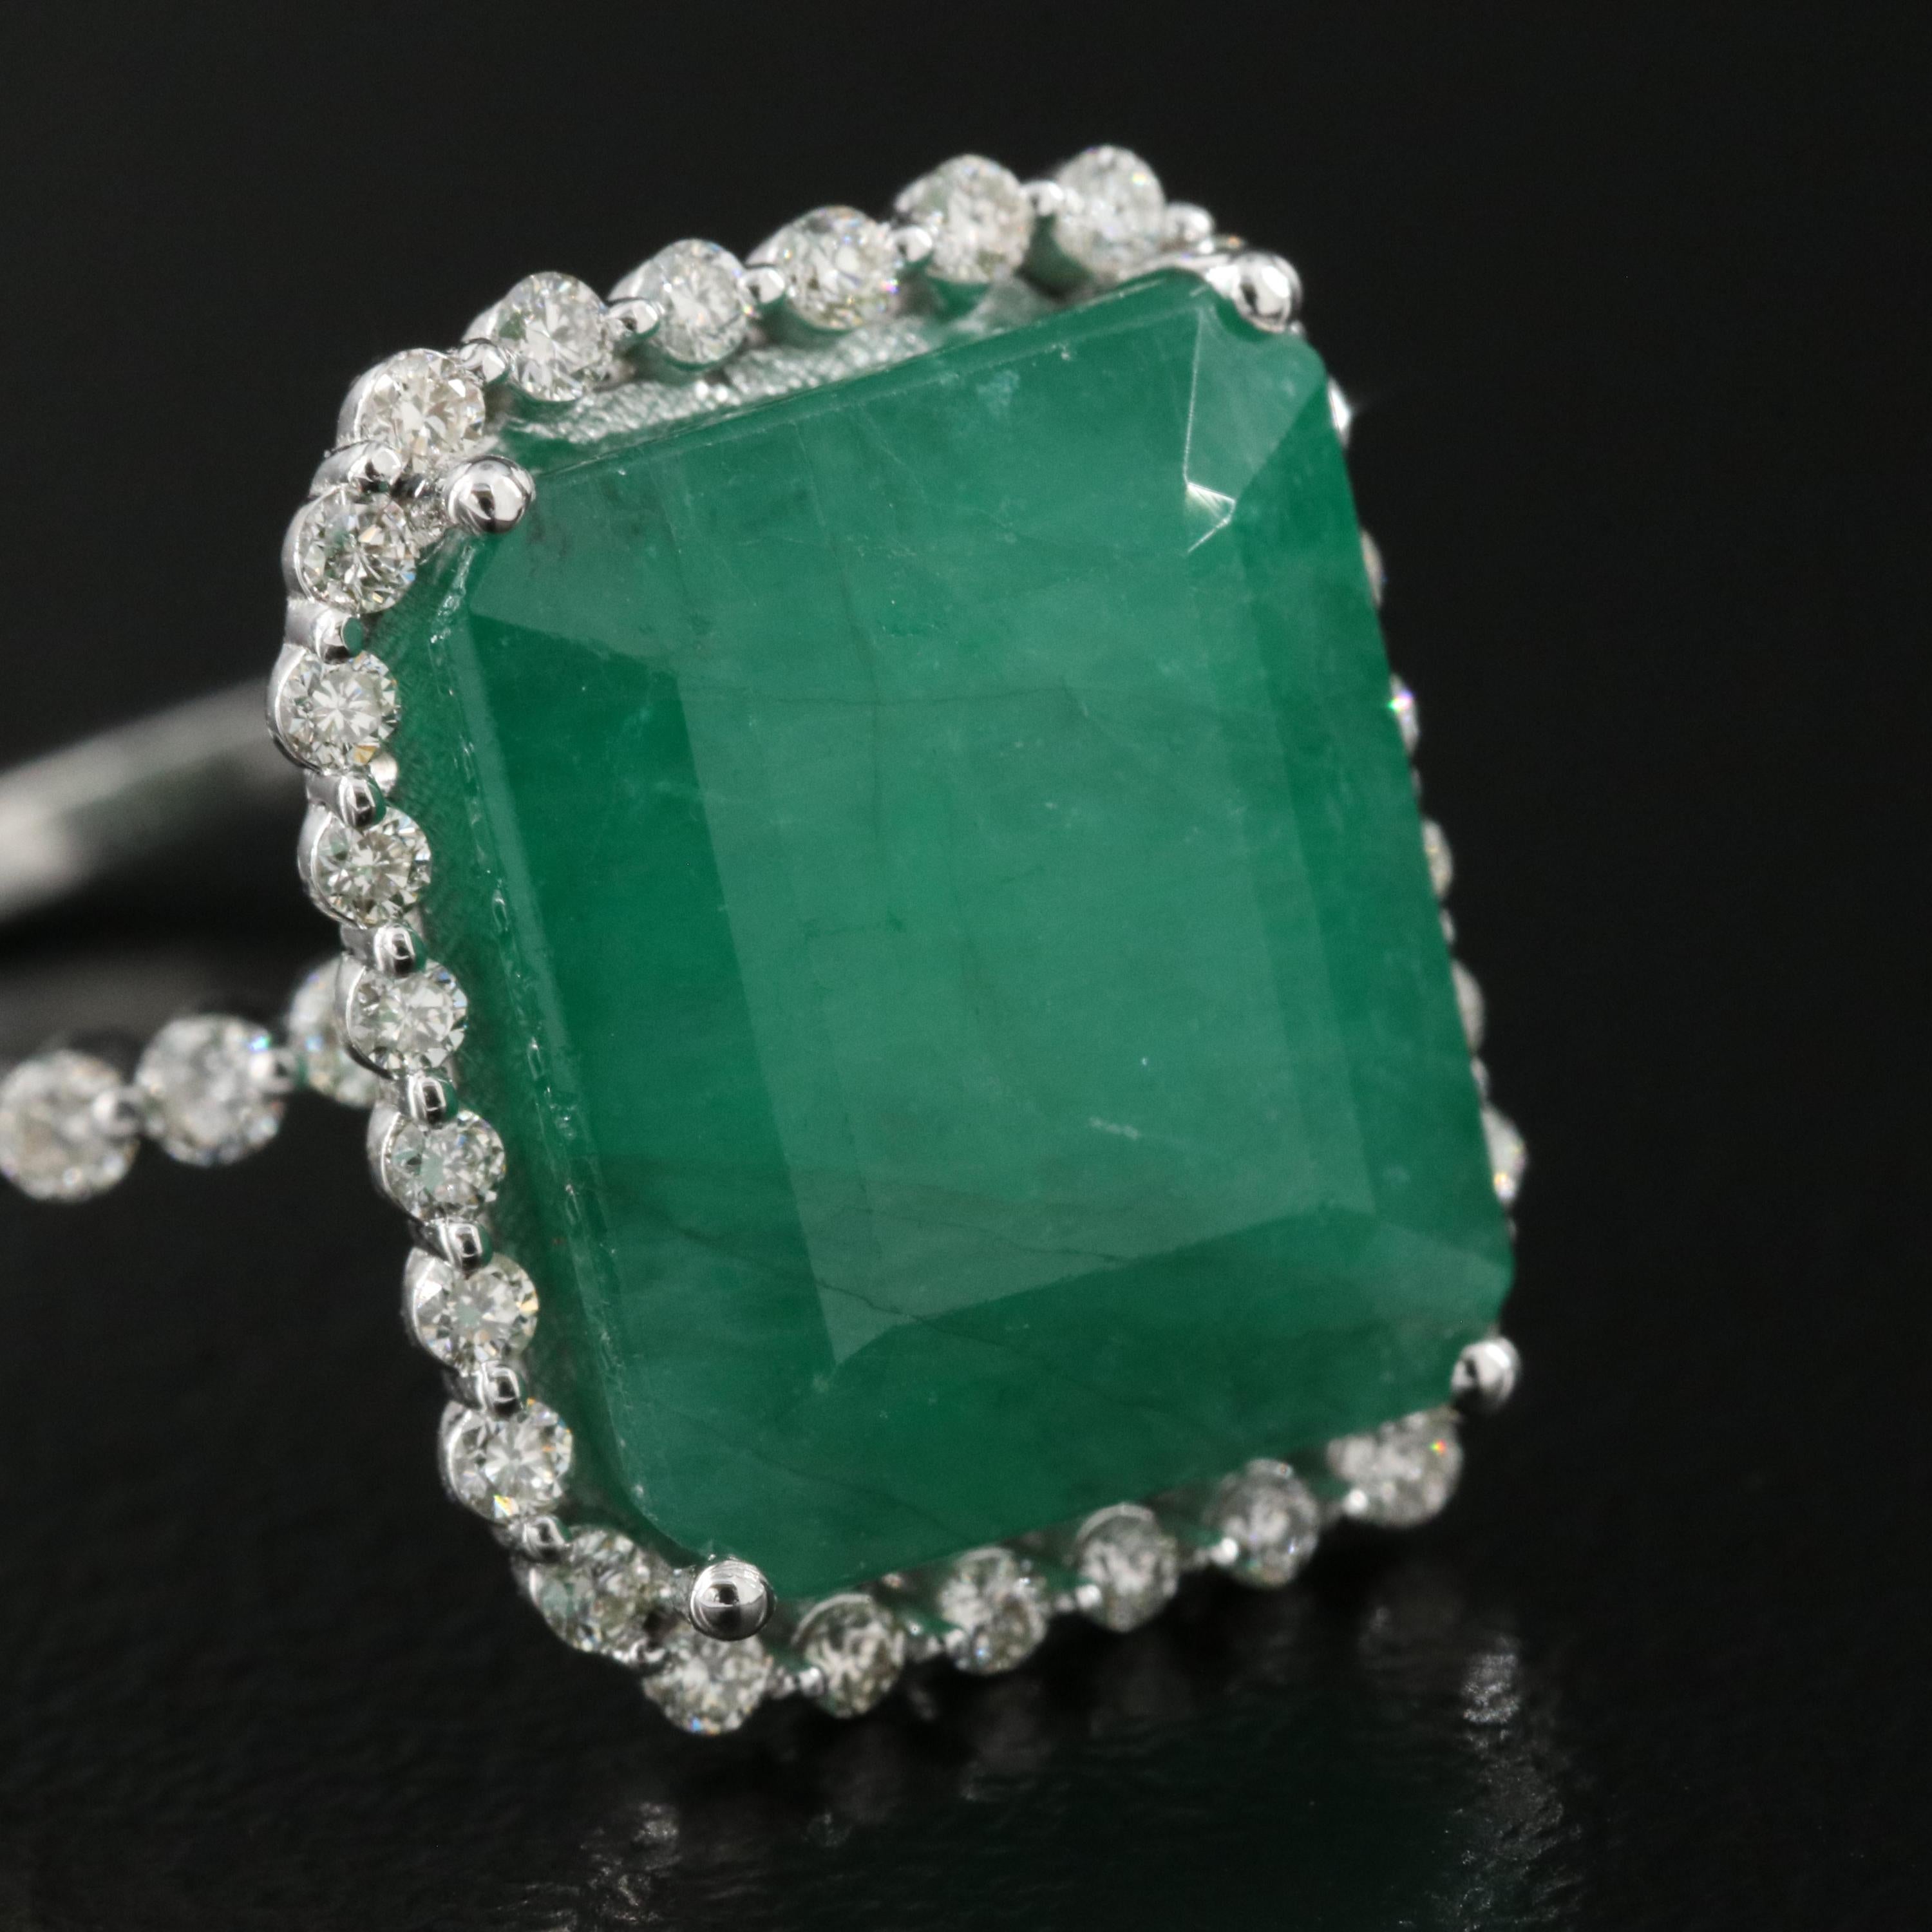 Antique Certified 7 Carat Natural Emerald and Diamond White Gold Engagement Ring

A stunning ring featuring IGI/GIA Certified 7 Carat Natural Emerald and 0.37 Carat of Diamond Accents set in 18K Solid Gold.

Emeralds are highly valued for their